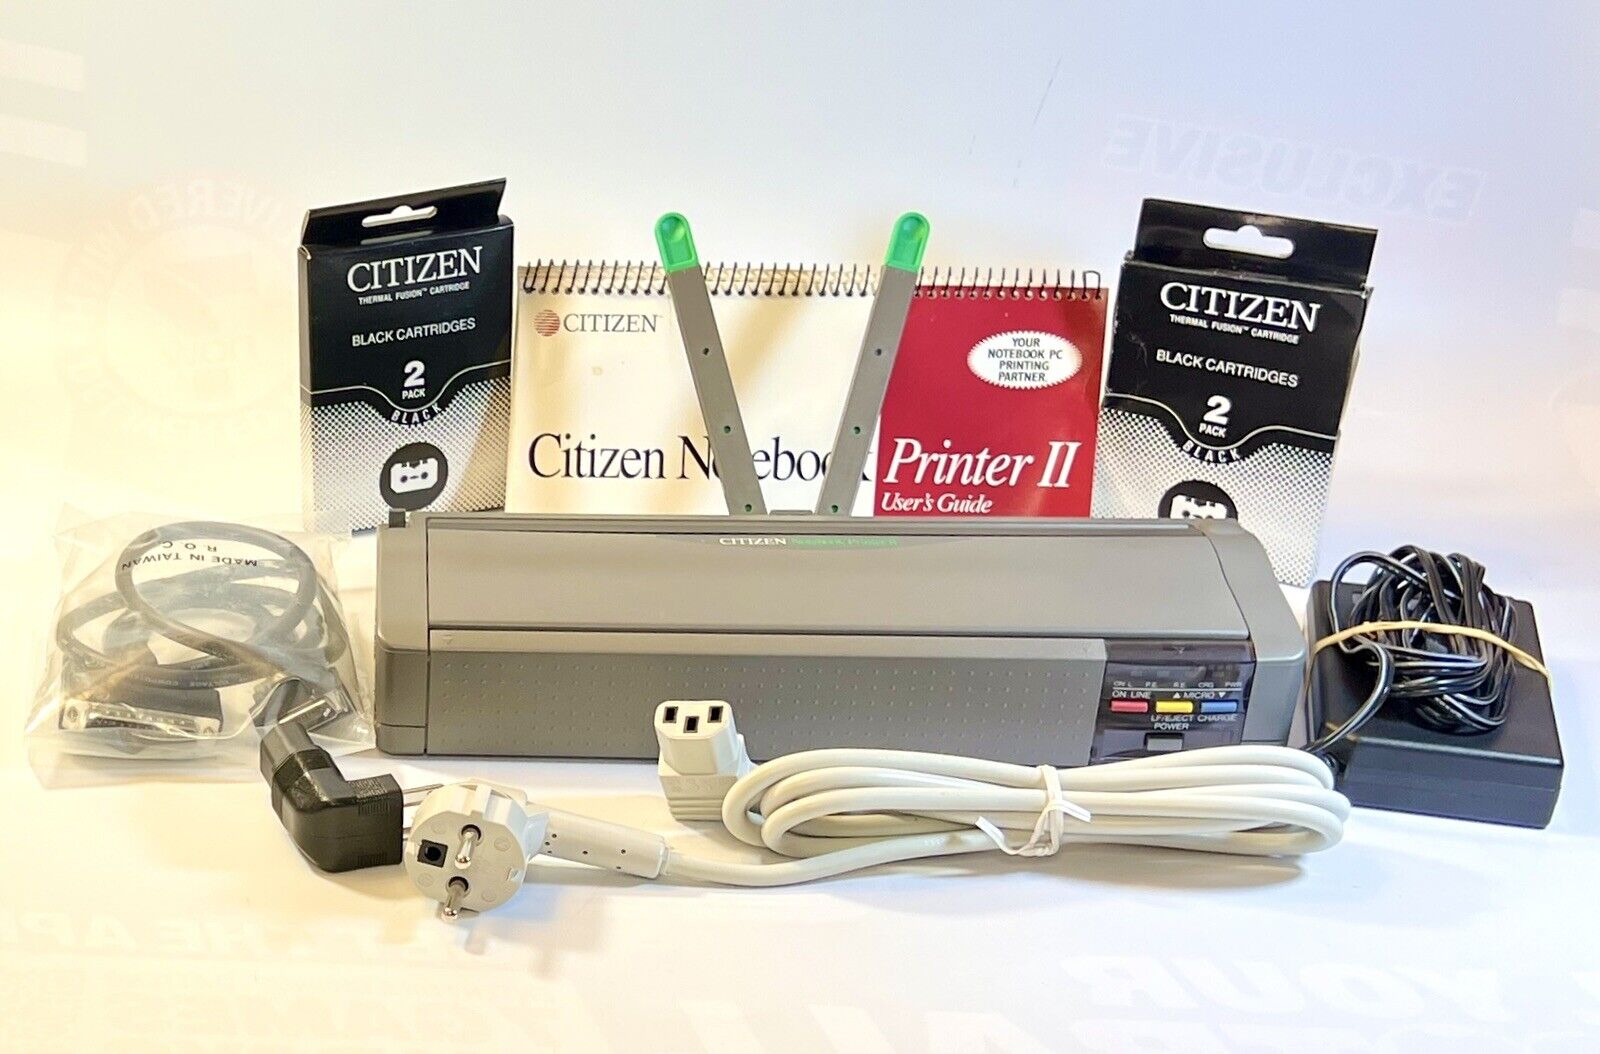 Vintage Citizen Notebook Printer II With Cartridges Cords & Manual Bundle Tested